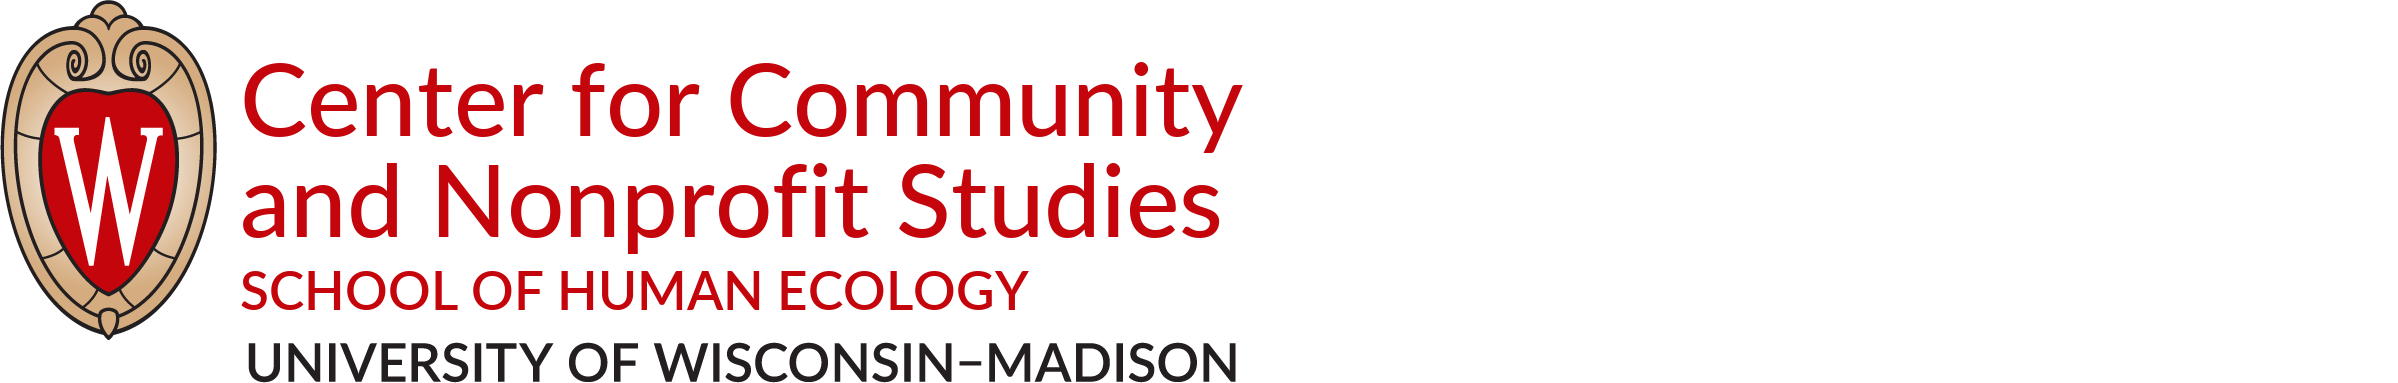 University of Wisconsin-Madison Center for Community and Nonprofit Studies